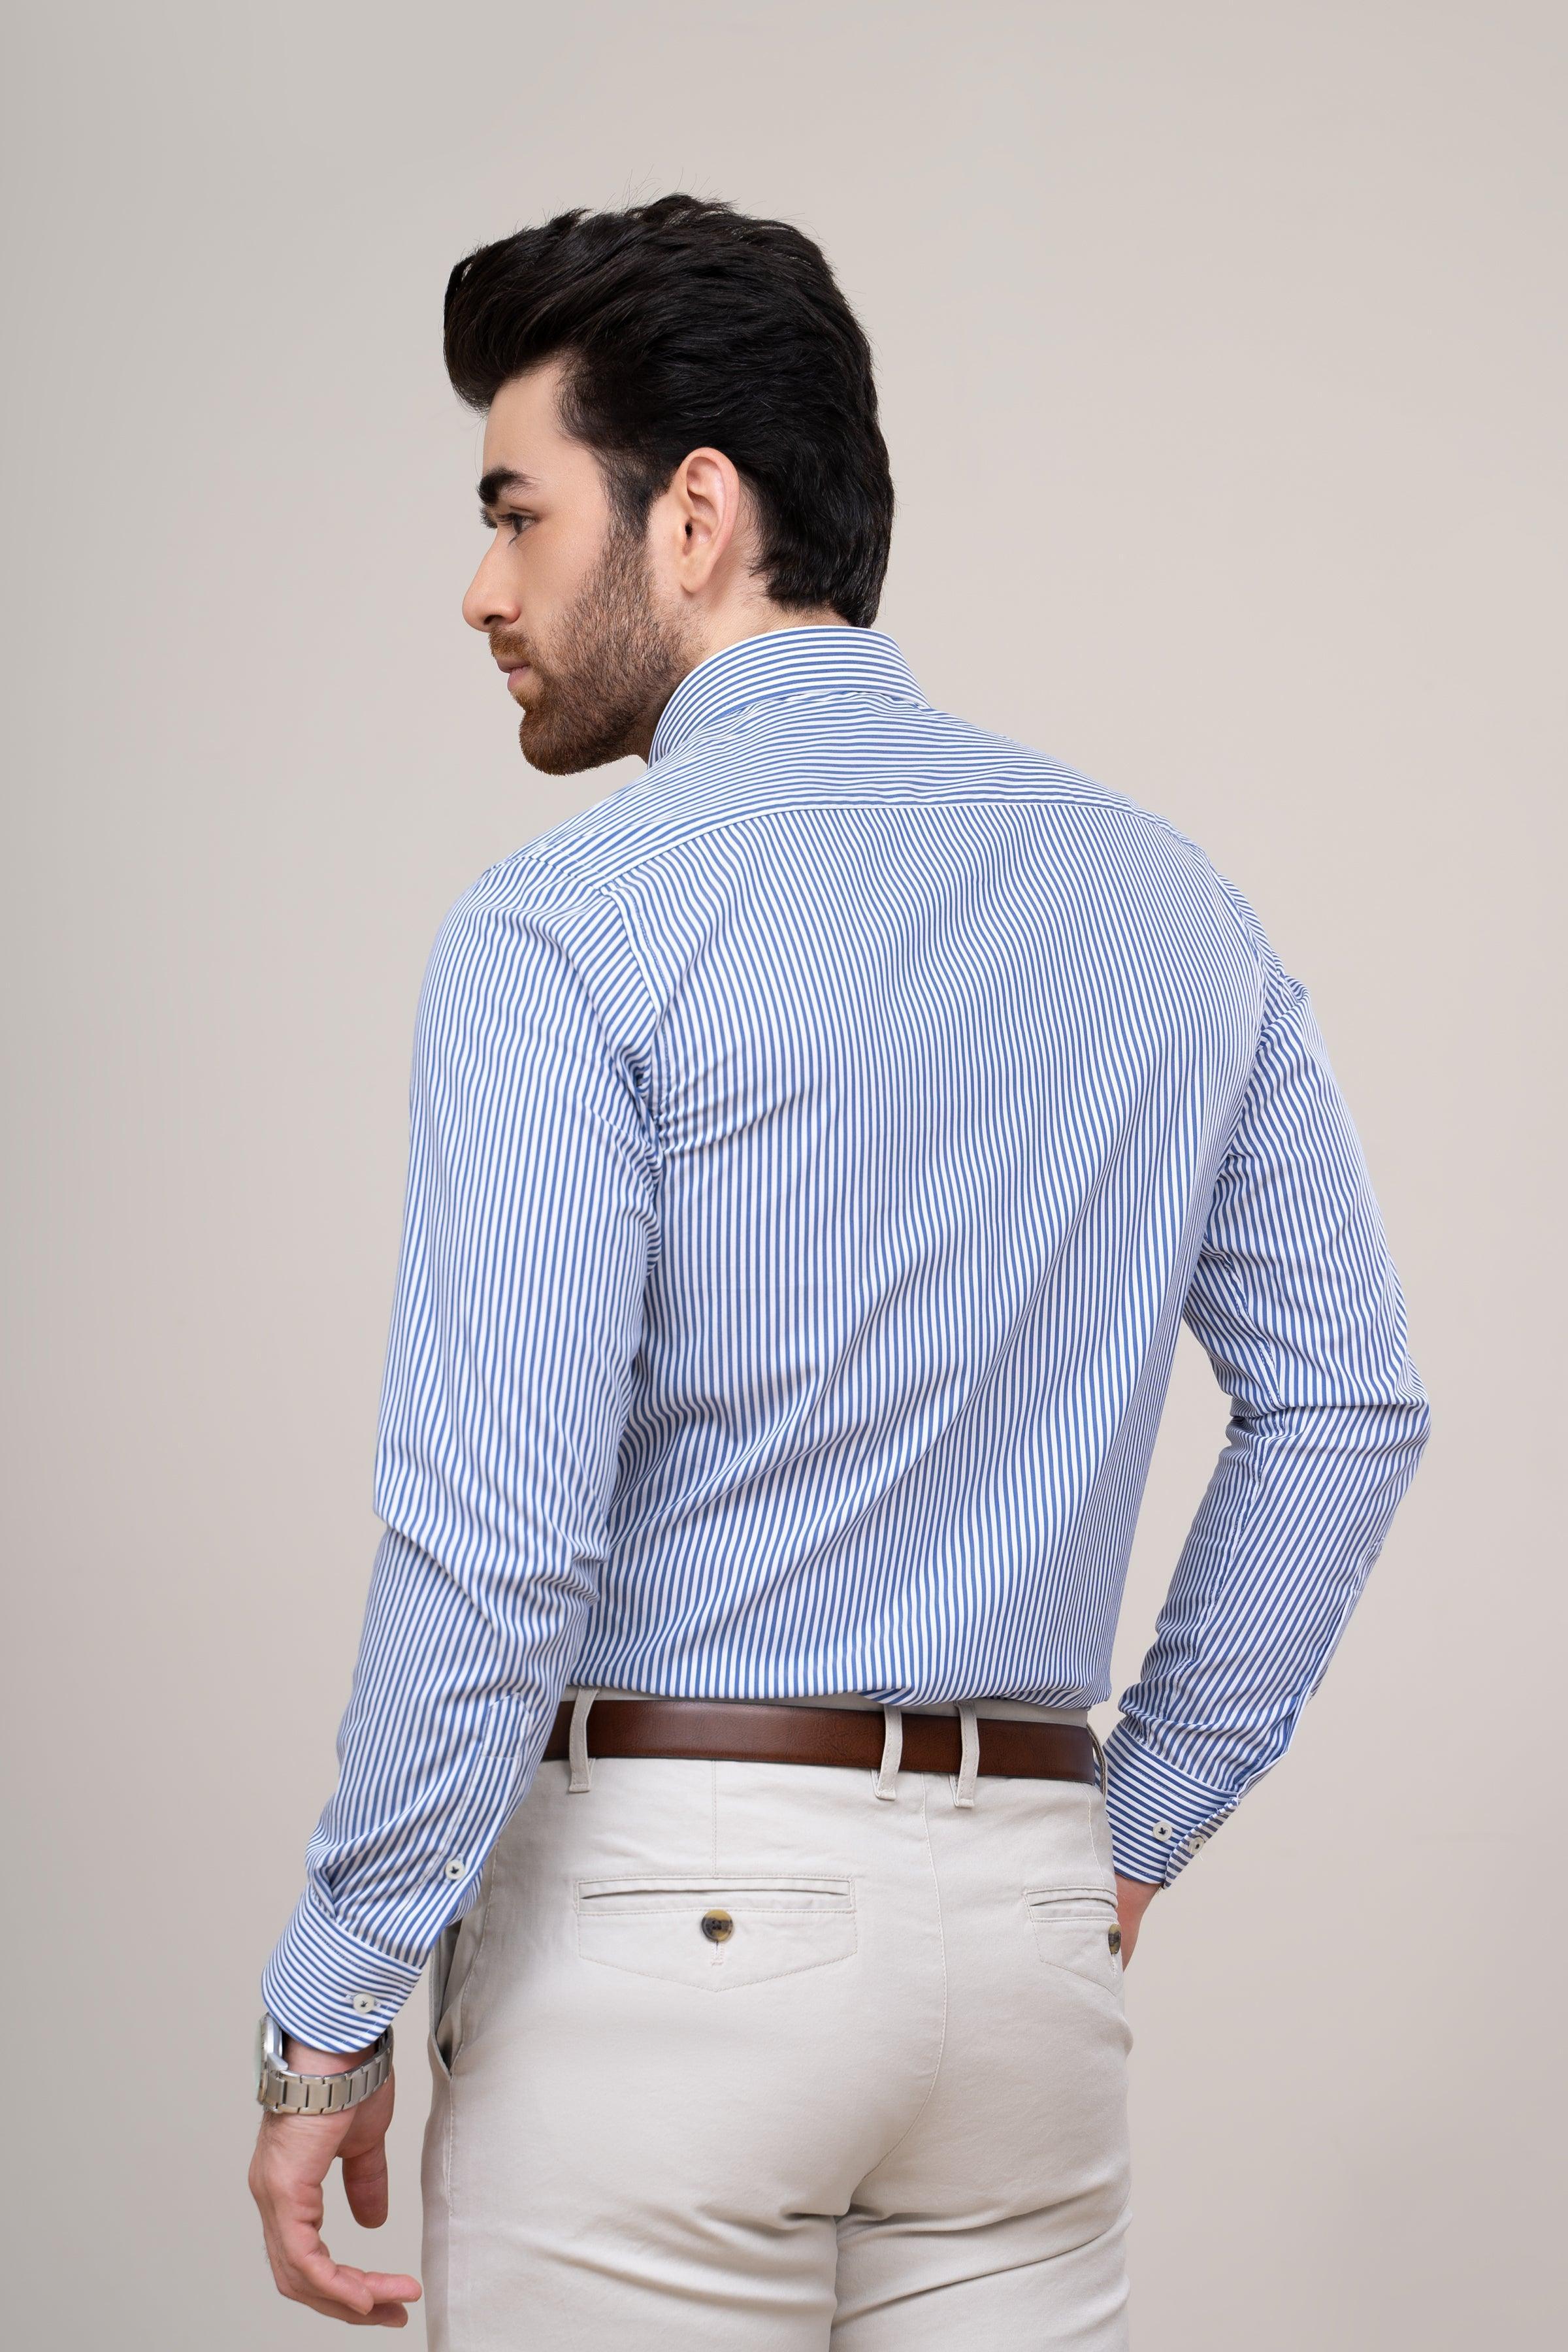 SEMI FORMAL SHIRT BLUE WHITE LINE at Charcoal Clothing